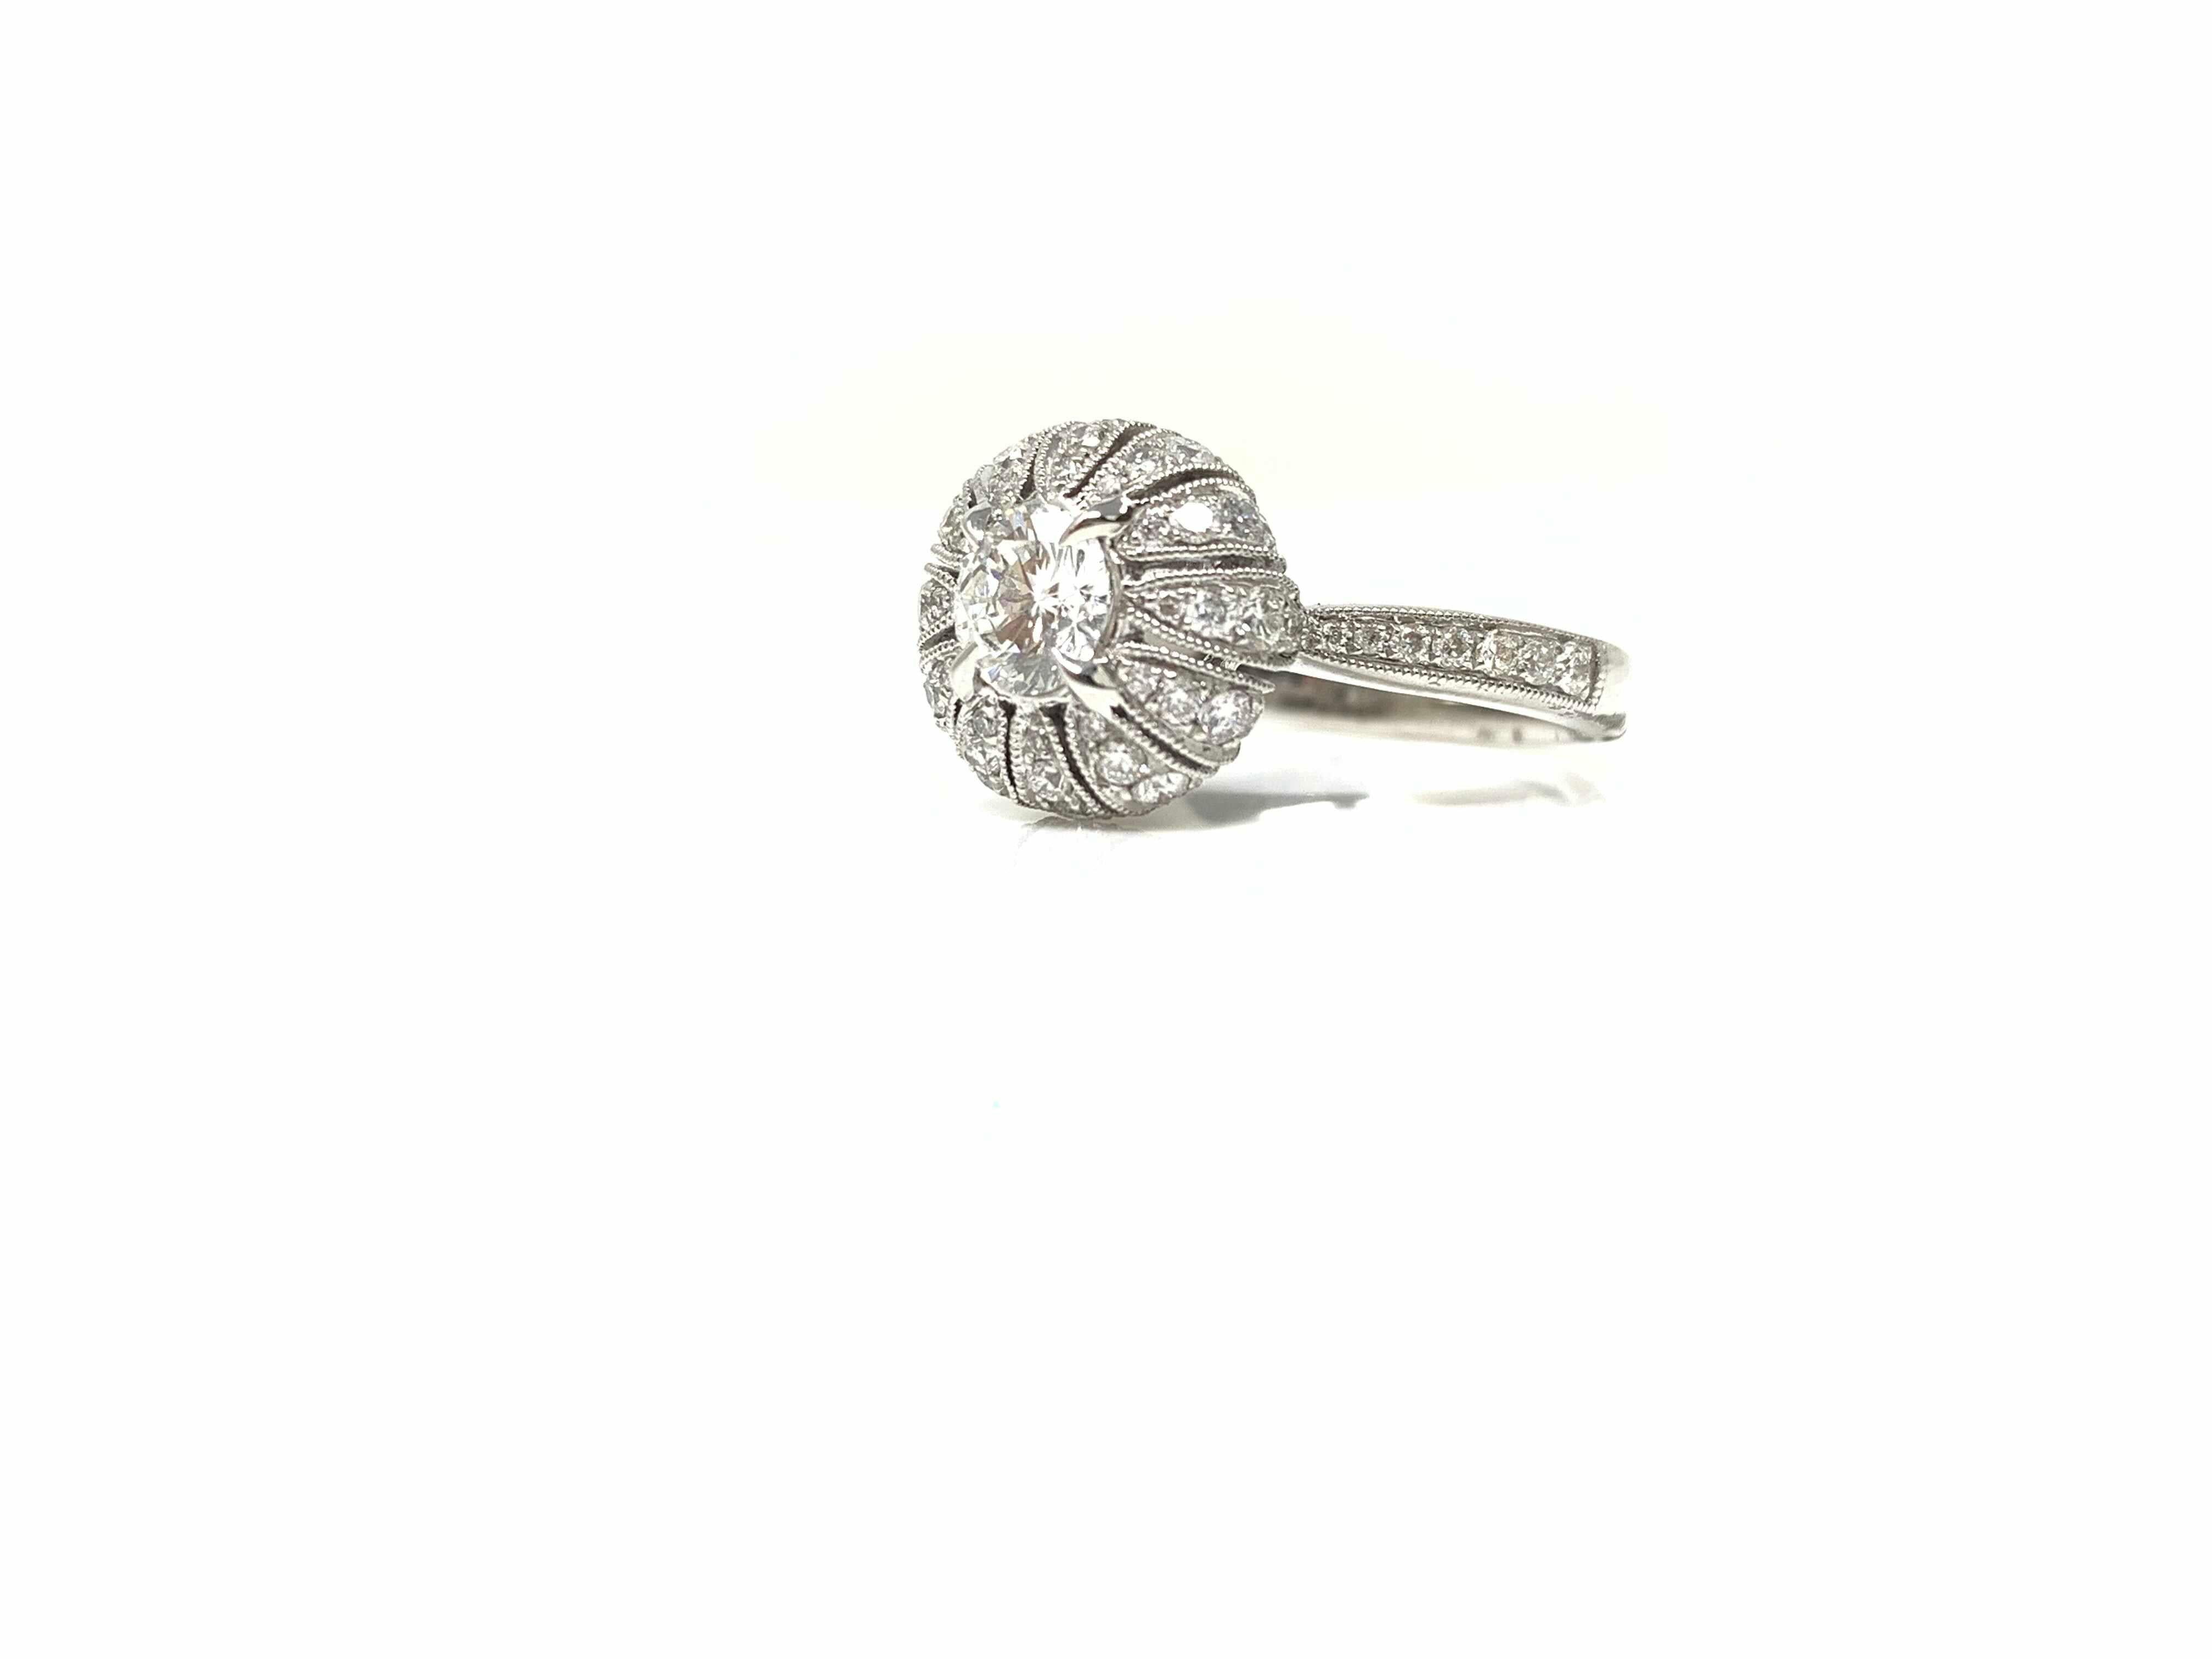 White Round Brilliant Cut Diamond Engagement Ring in 18 Karat White Gold In Excellent Condition For Sale In New York, NY